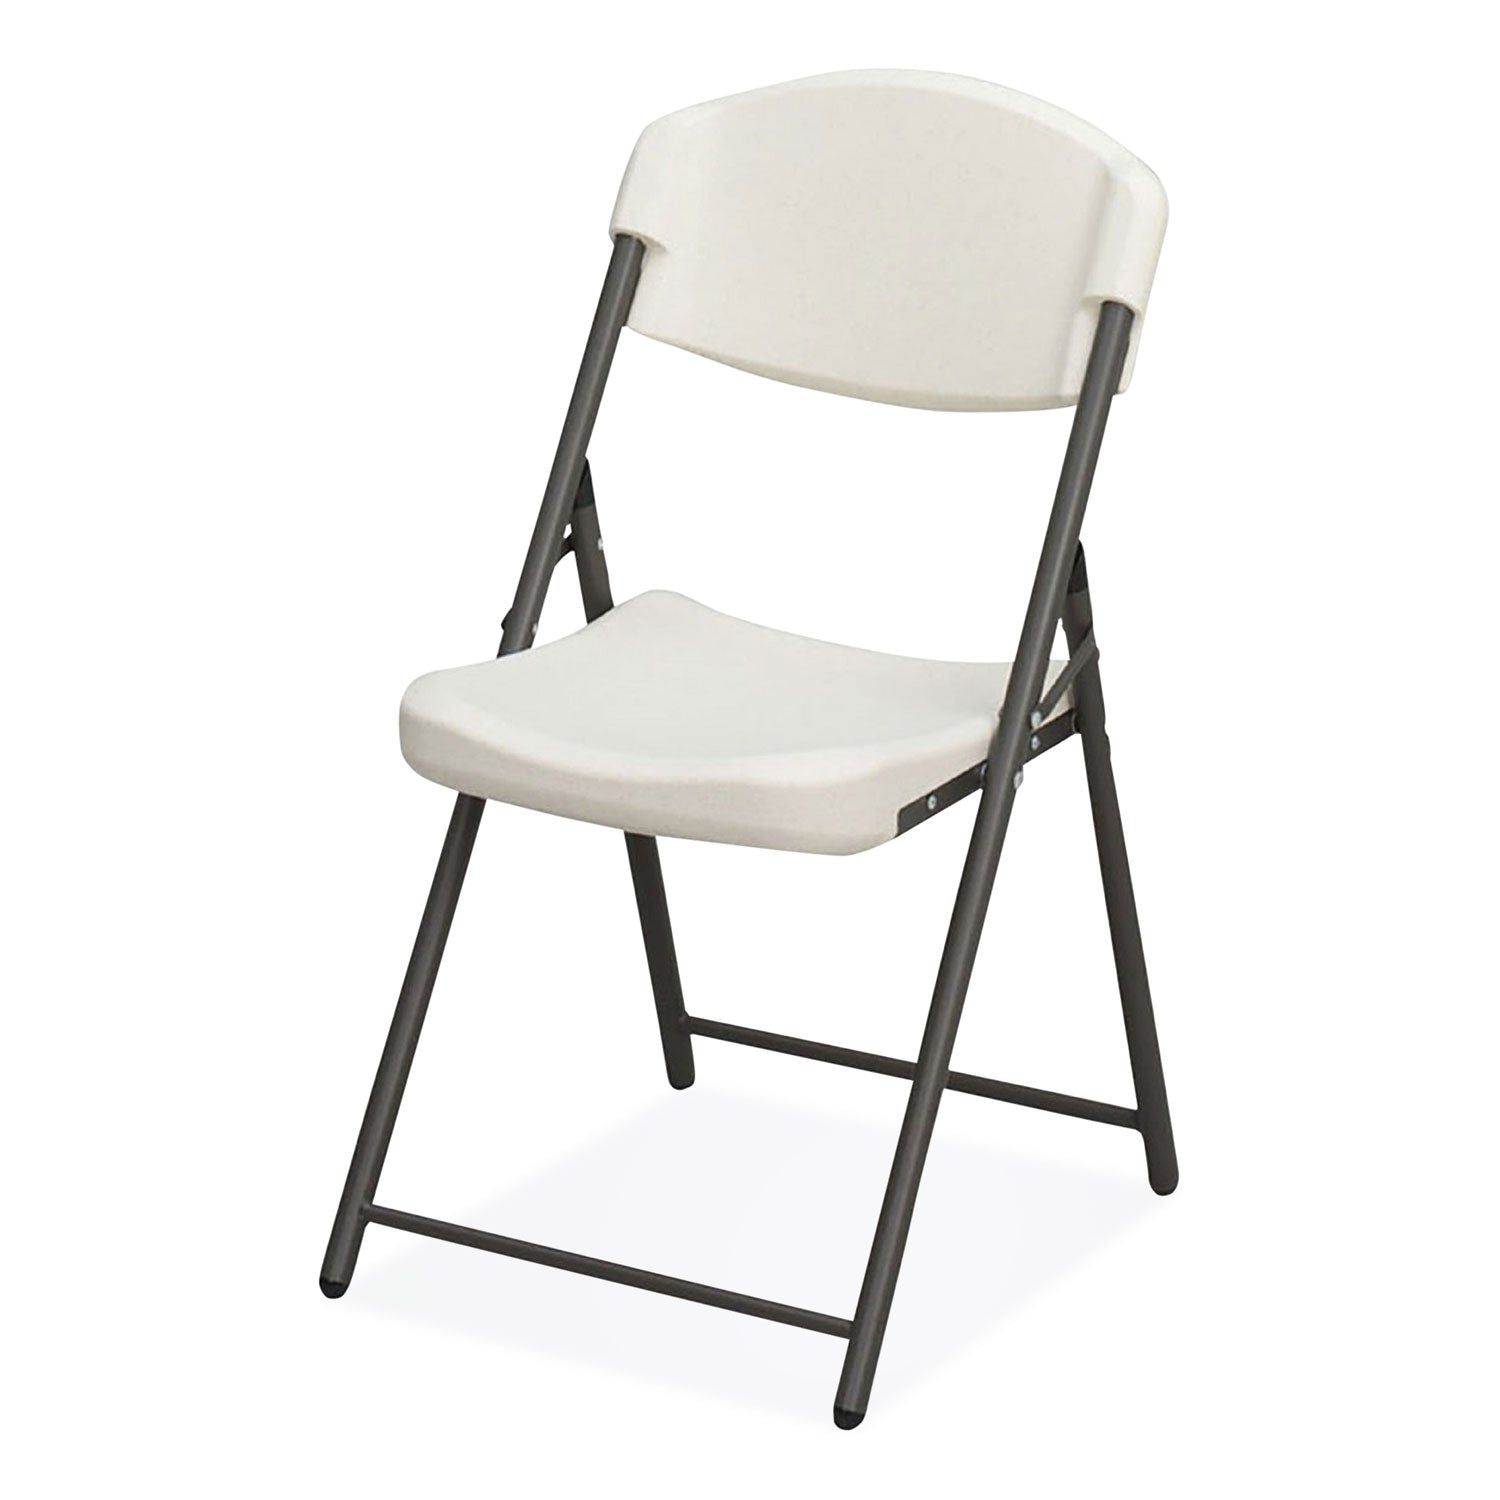 rough-n-ready-commercial-folding-chair-supports-up-to-350lb-18-seat-height-platinum-granite-seat-back-black-base-4-pack_ice64033 - 2